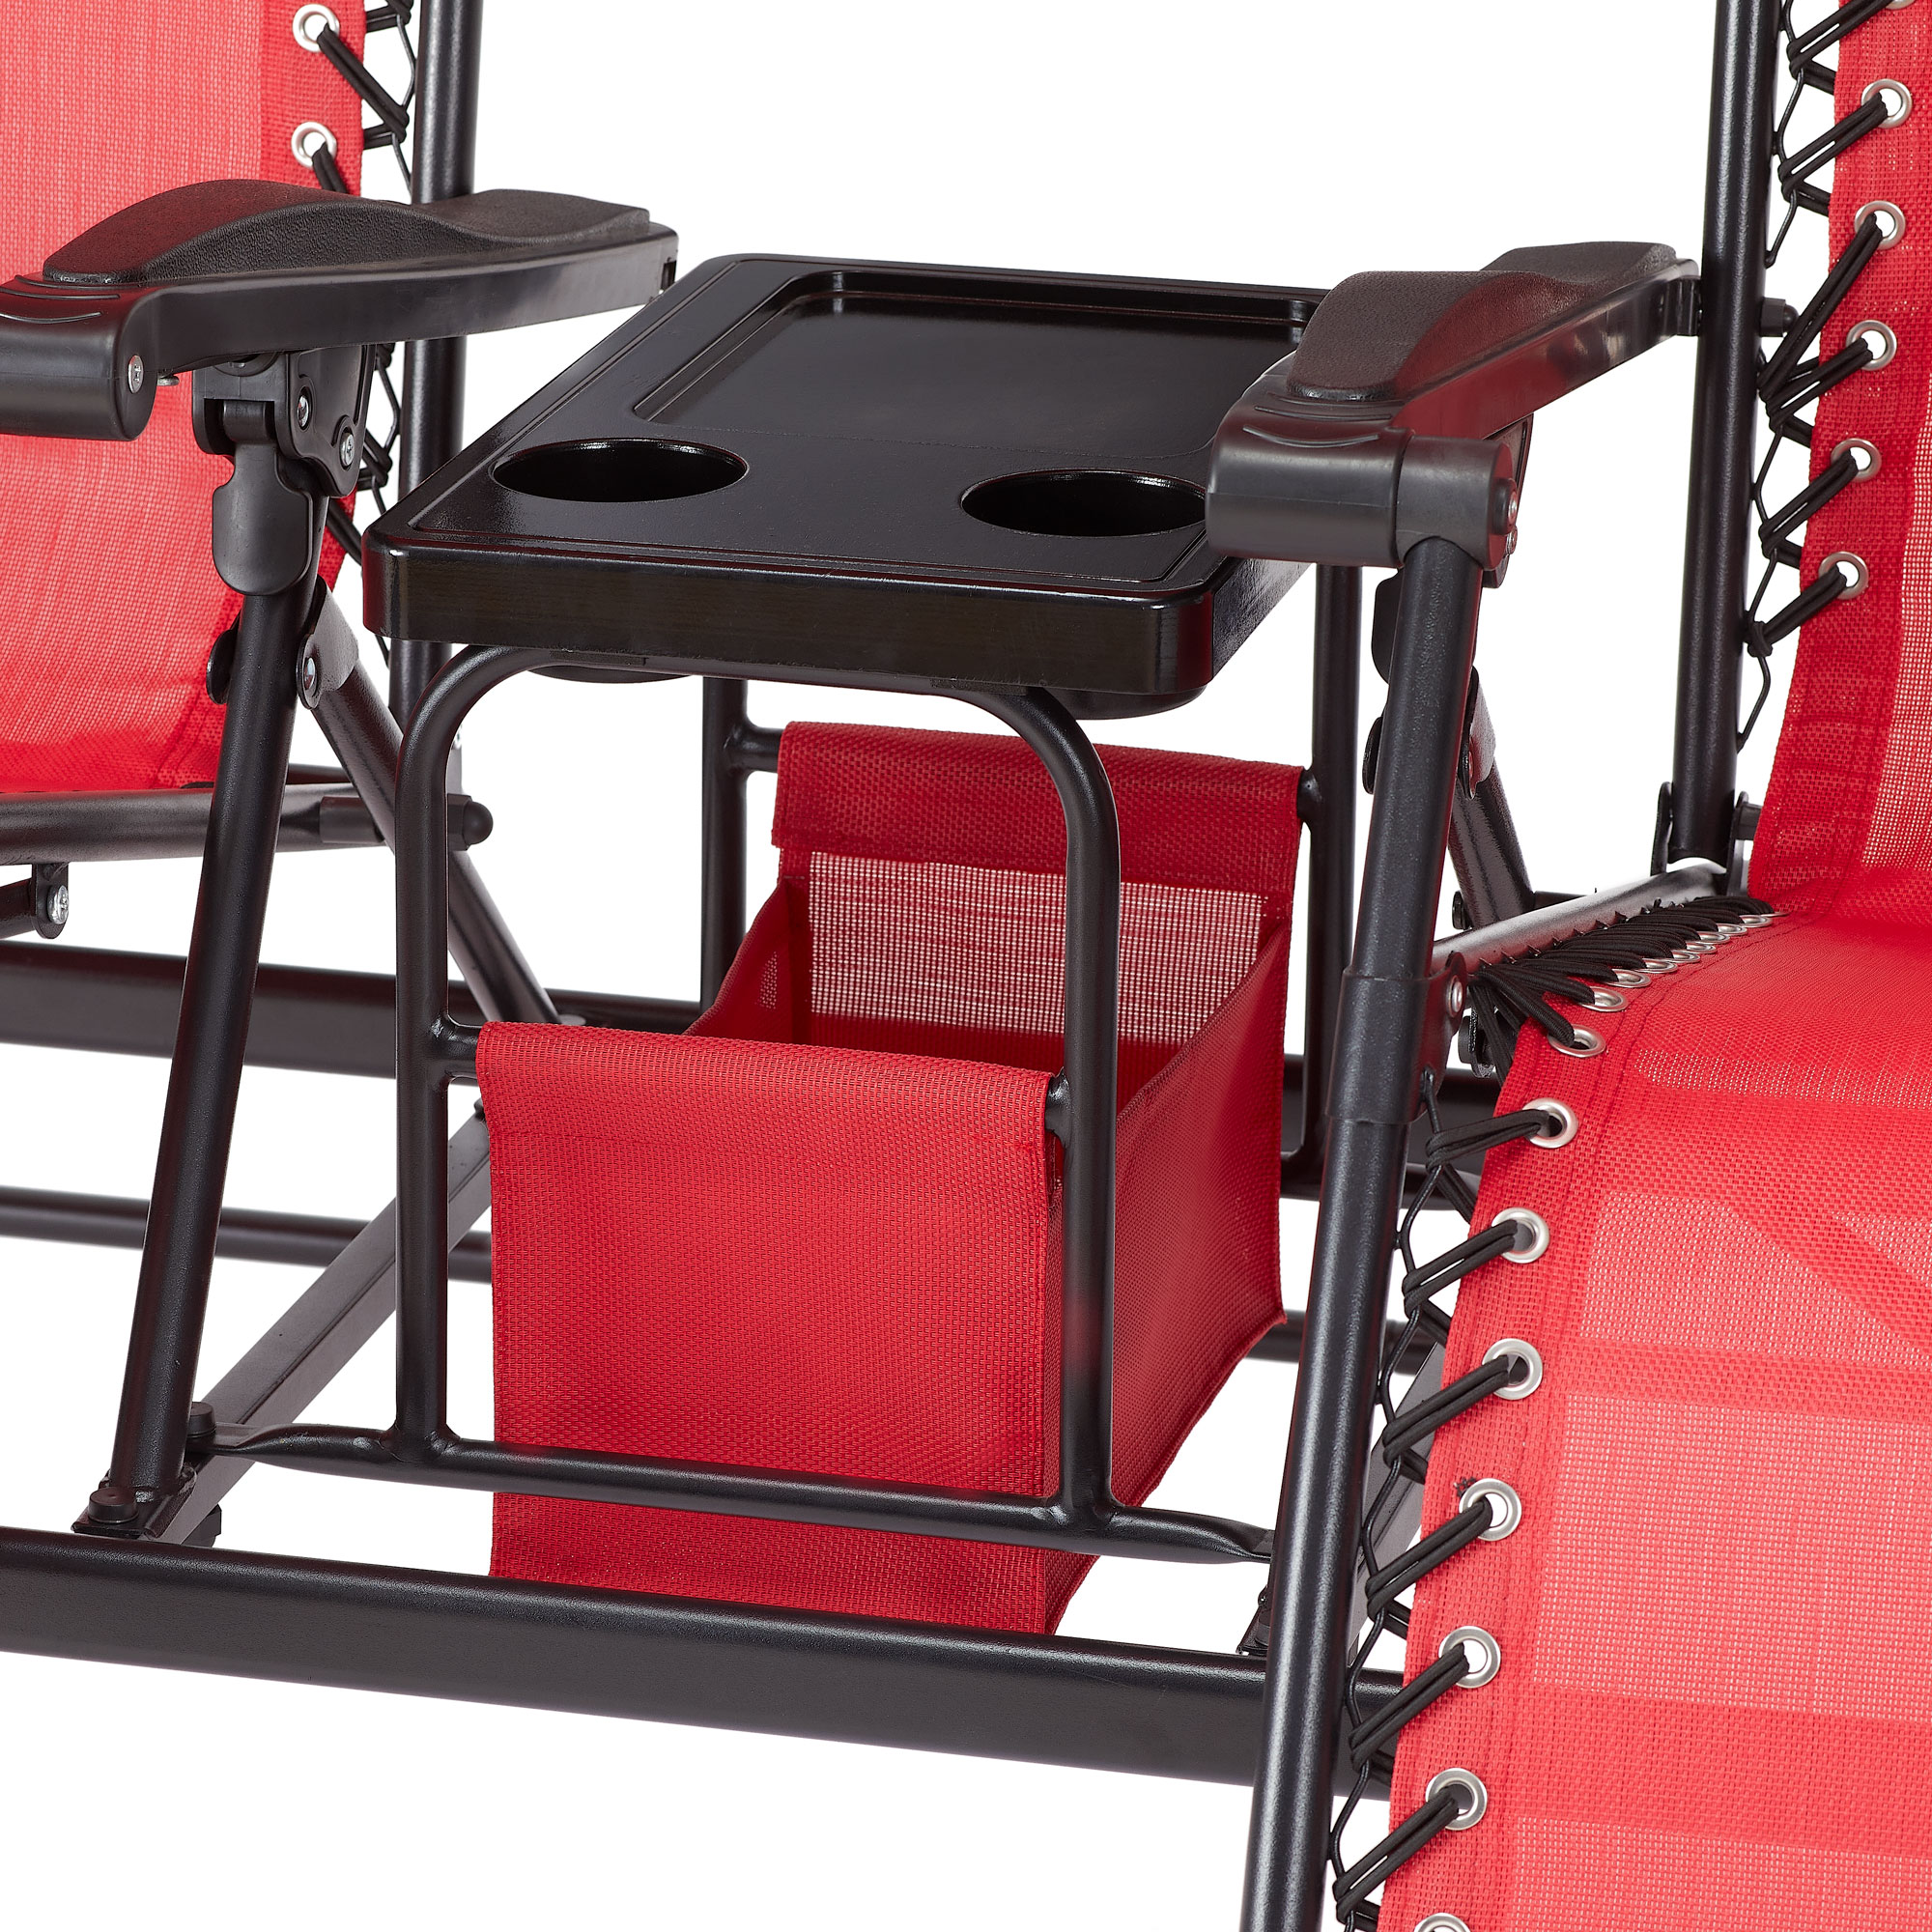 Mainstays 2-Seat Reclining Oversized Zero-Gravity Swing with Canopy and Center Storage Console, Red/Black - image 5 of 9